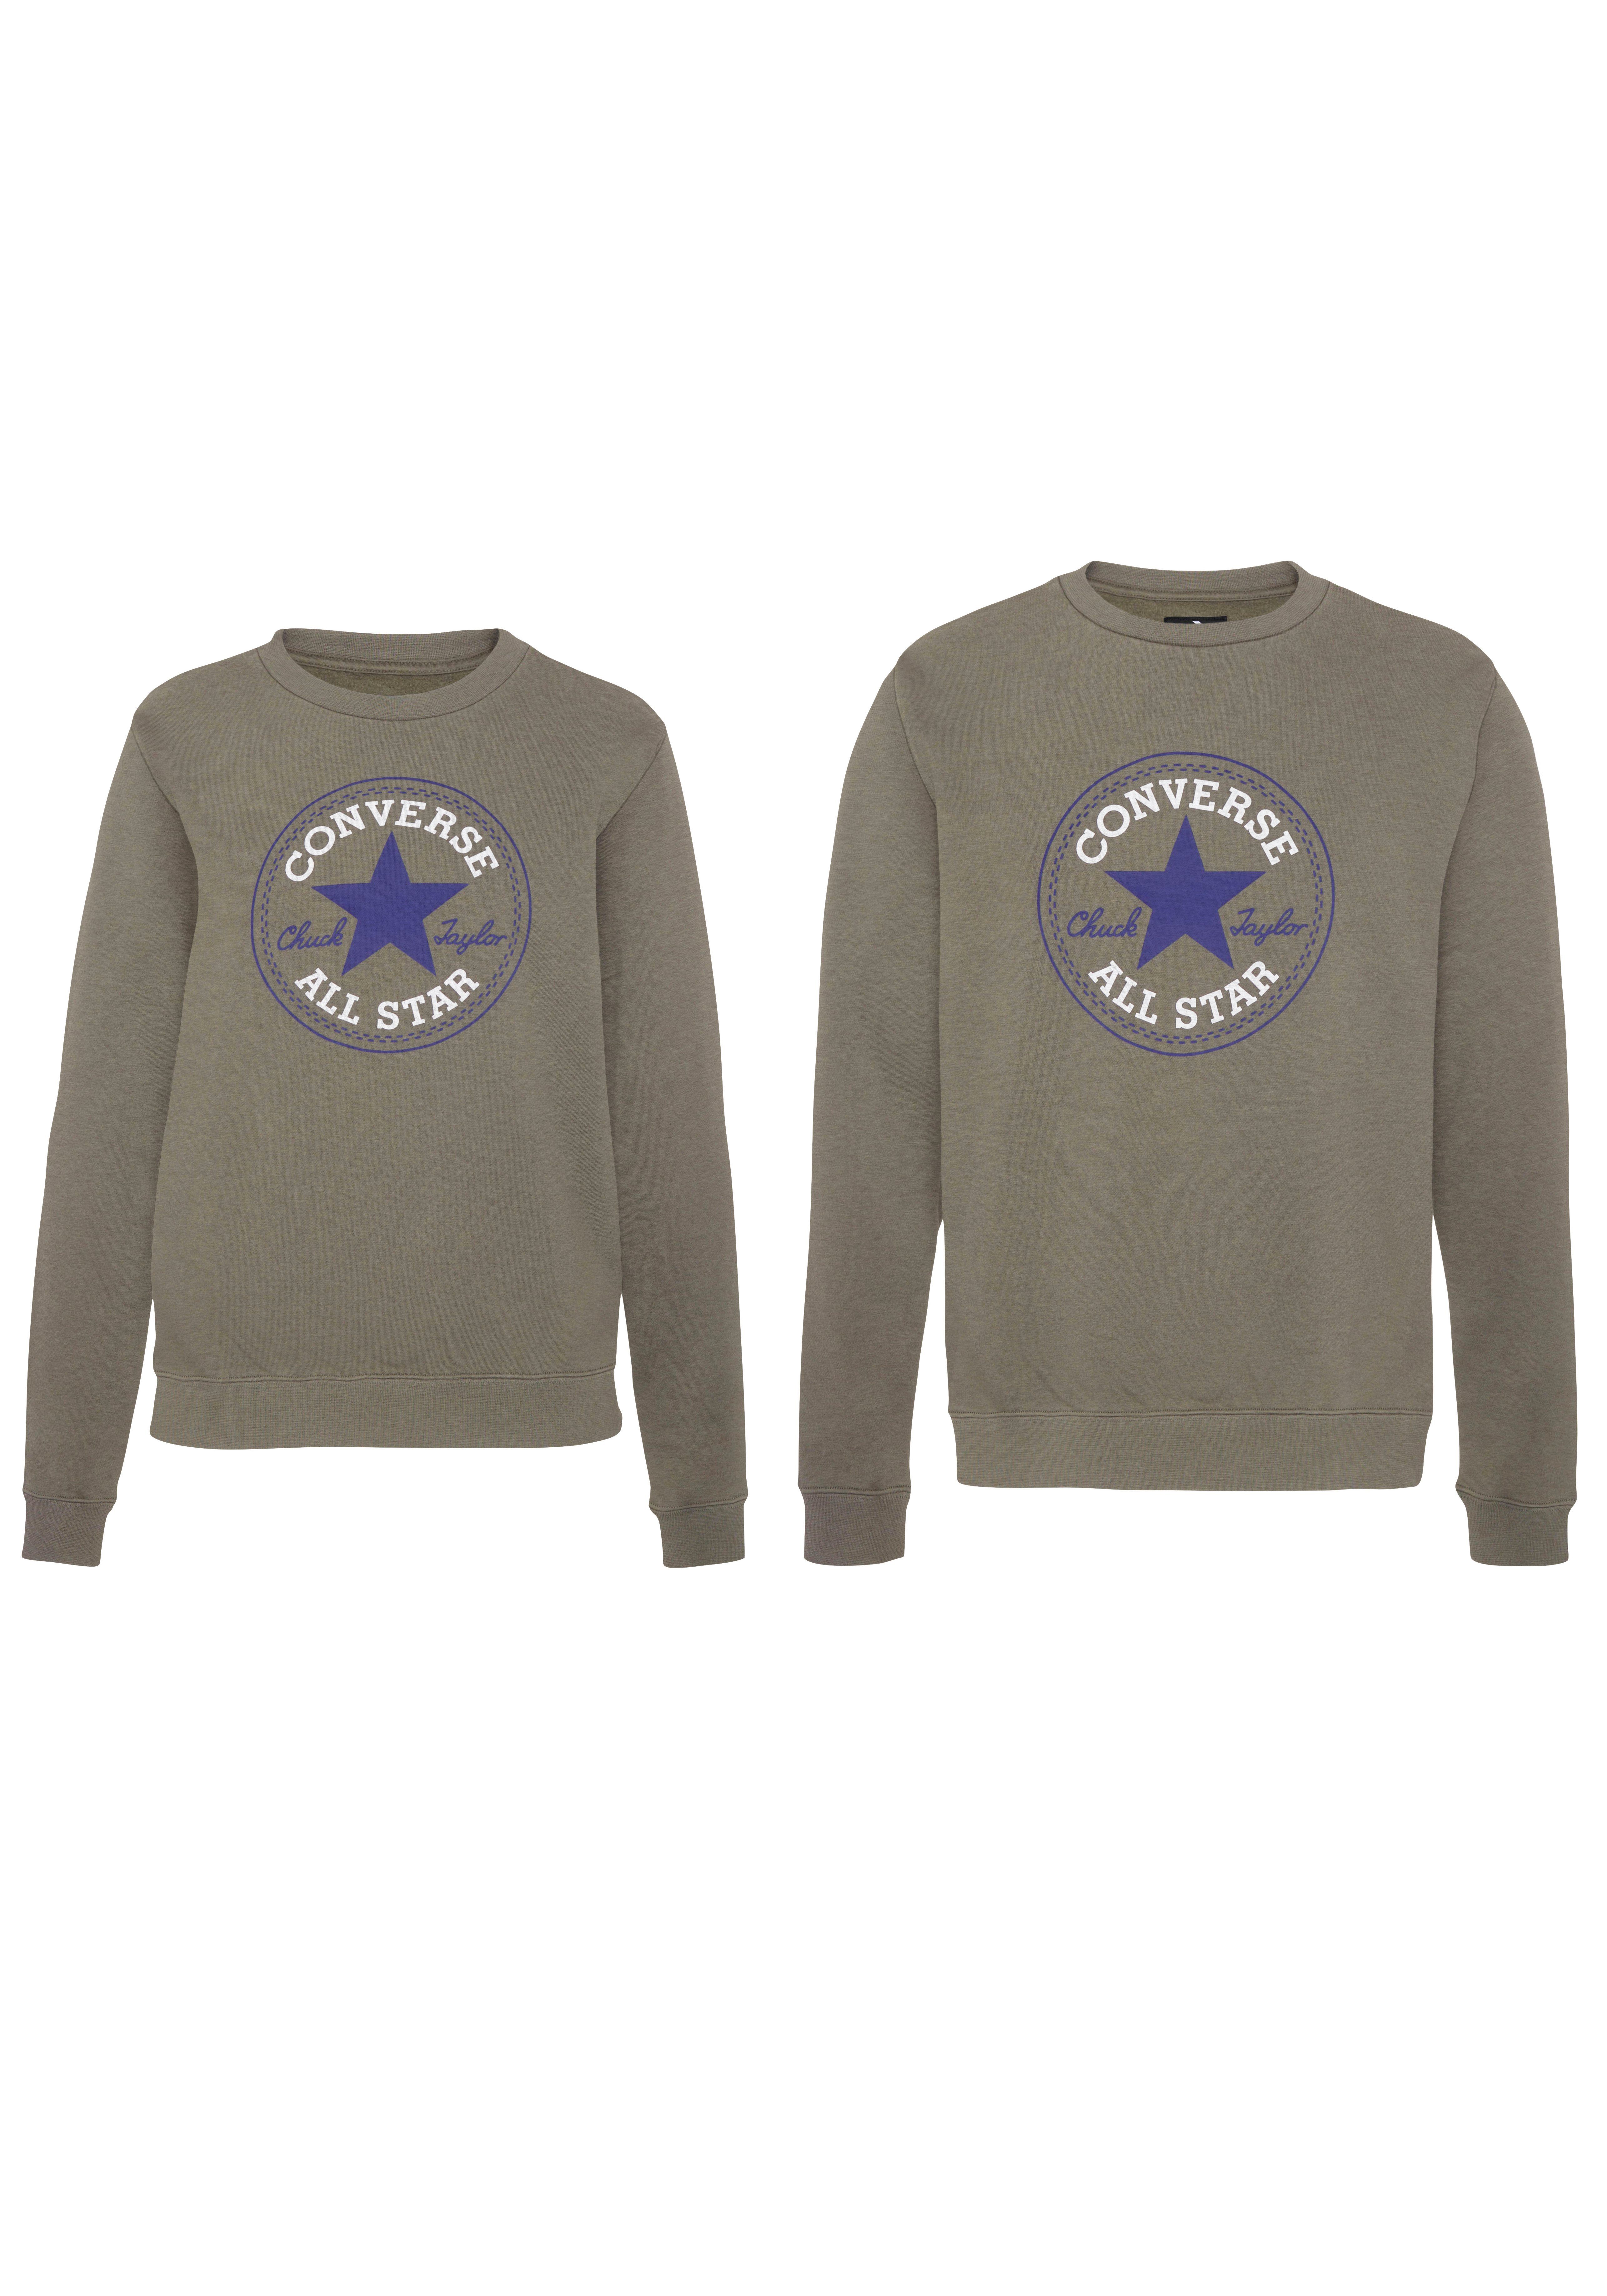 Converse Sweatshirt UNISEX ALL STAR BACK olive BRUSHED PATCH